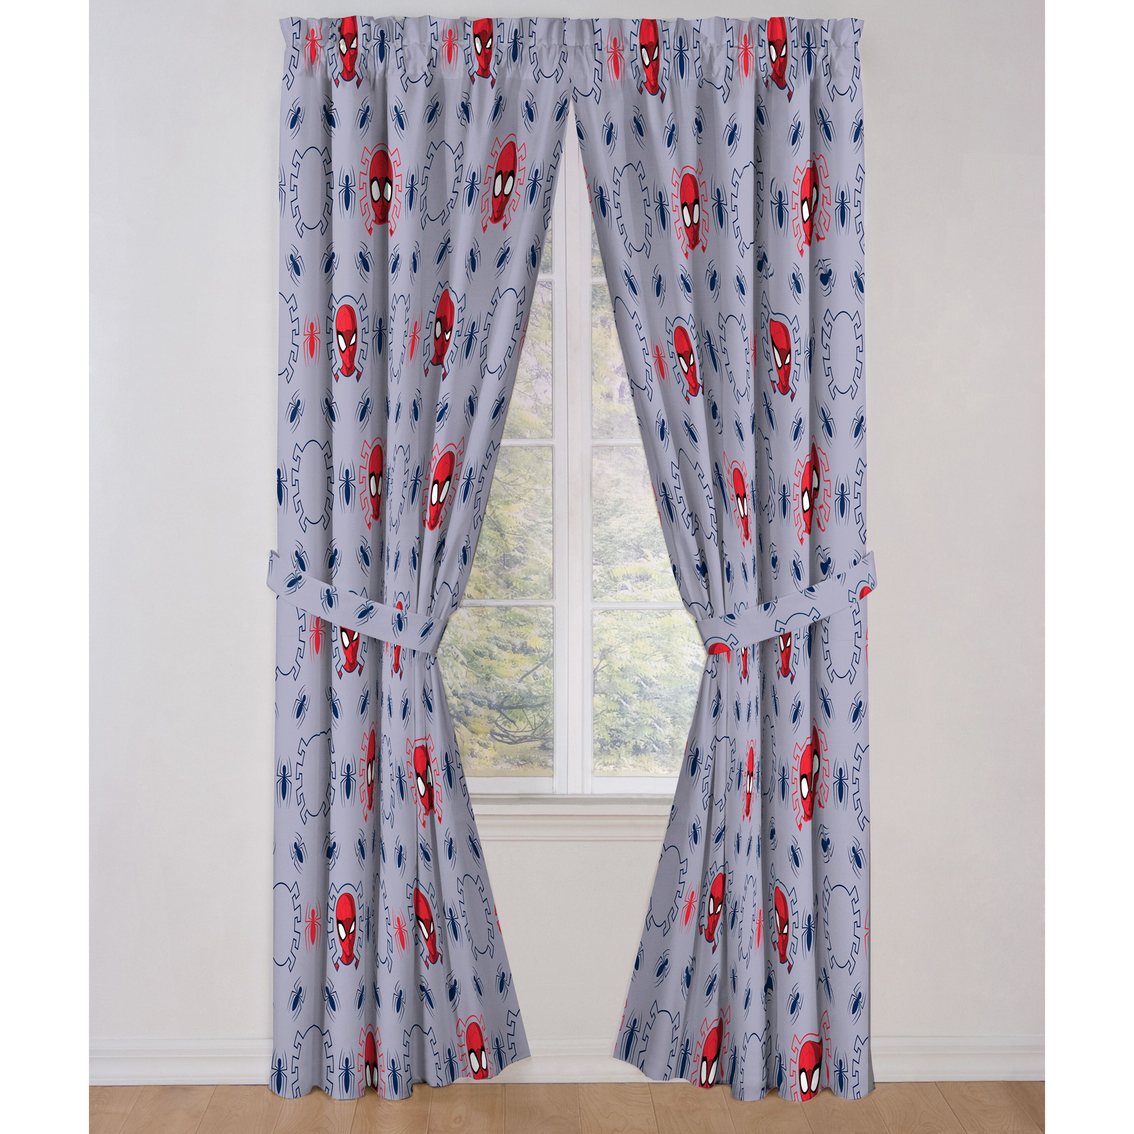 Details about   3D Curtains 1 Panel Spiderman Window Curtain Drapes with Grommets for Gifts